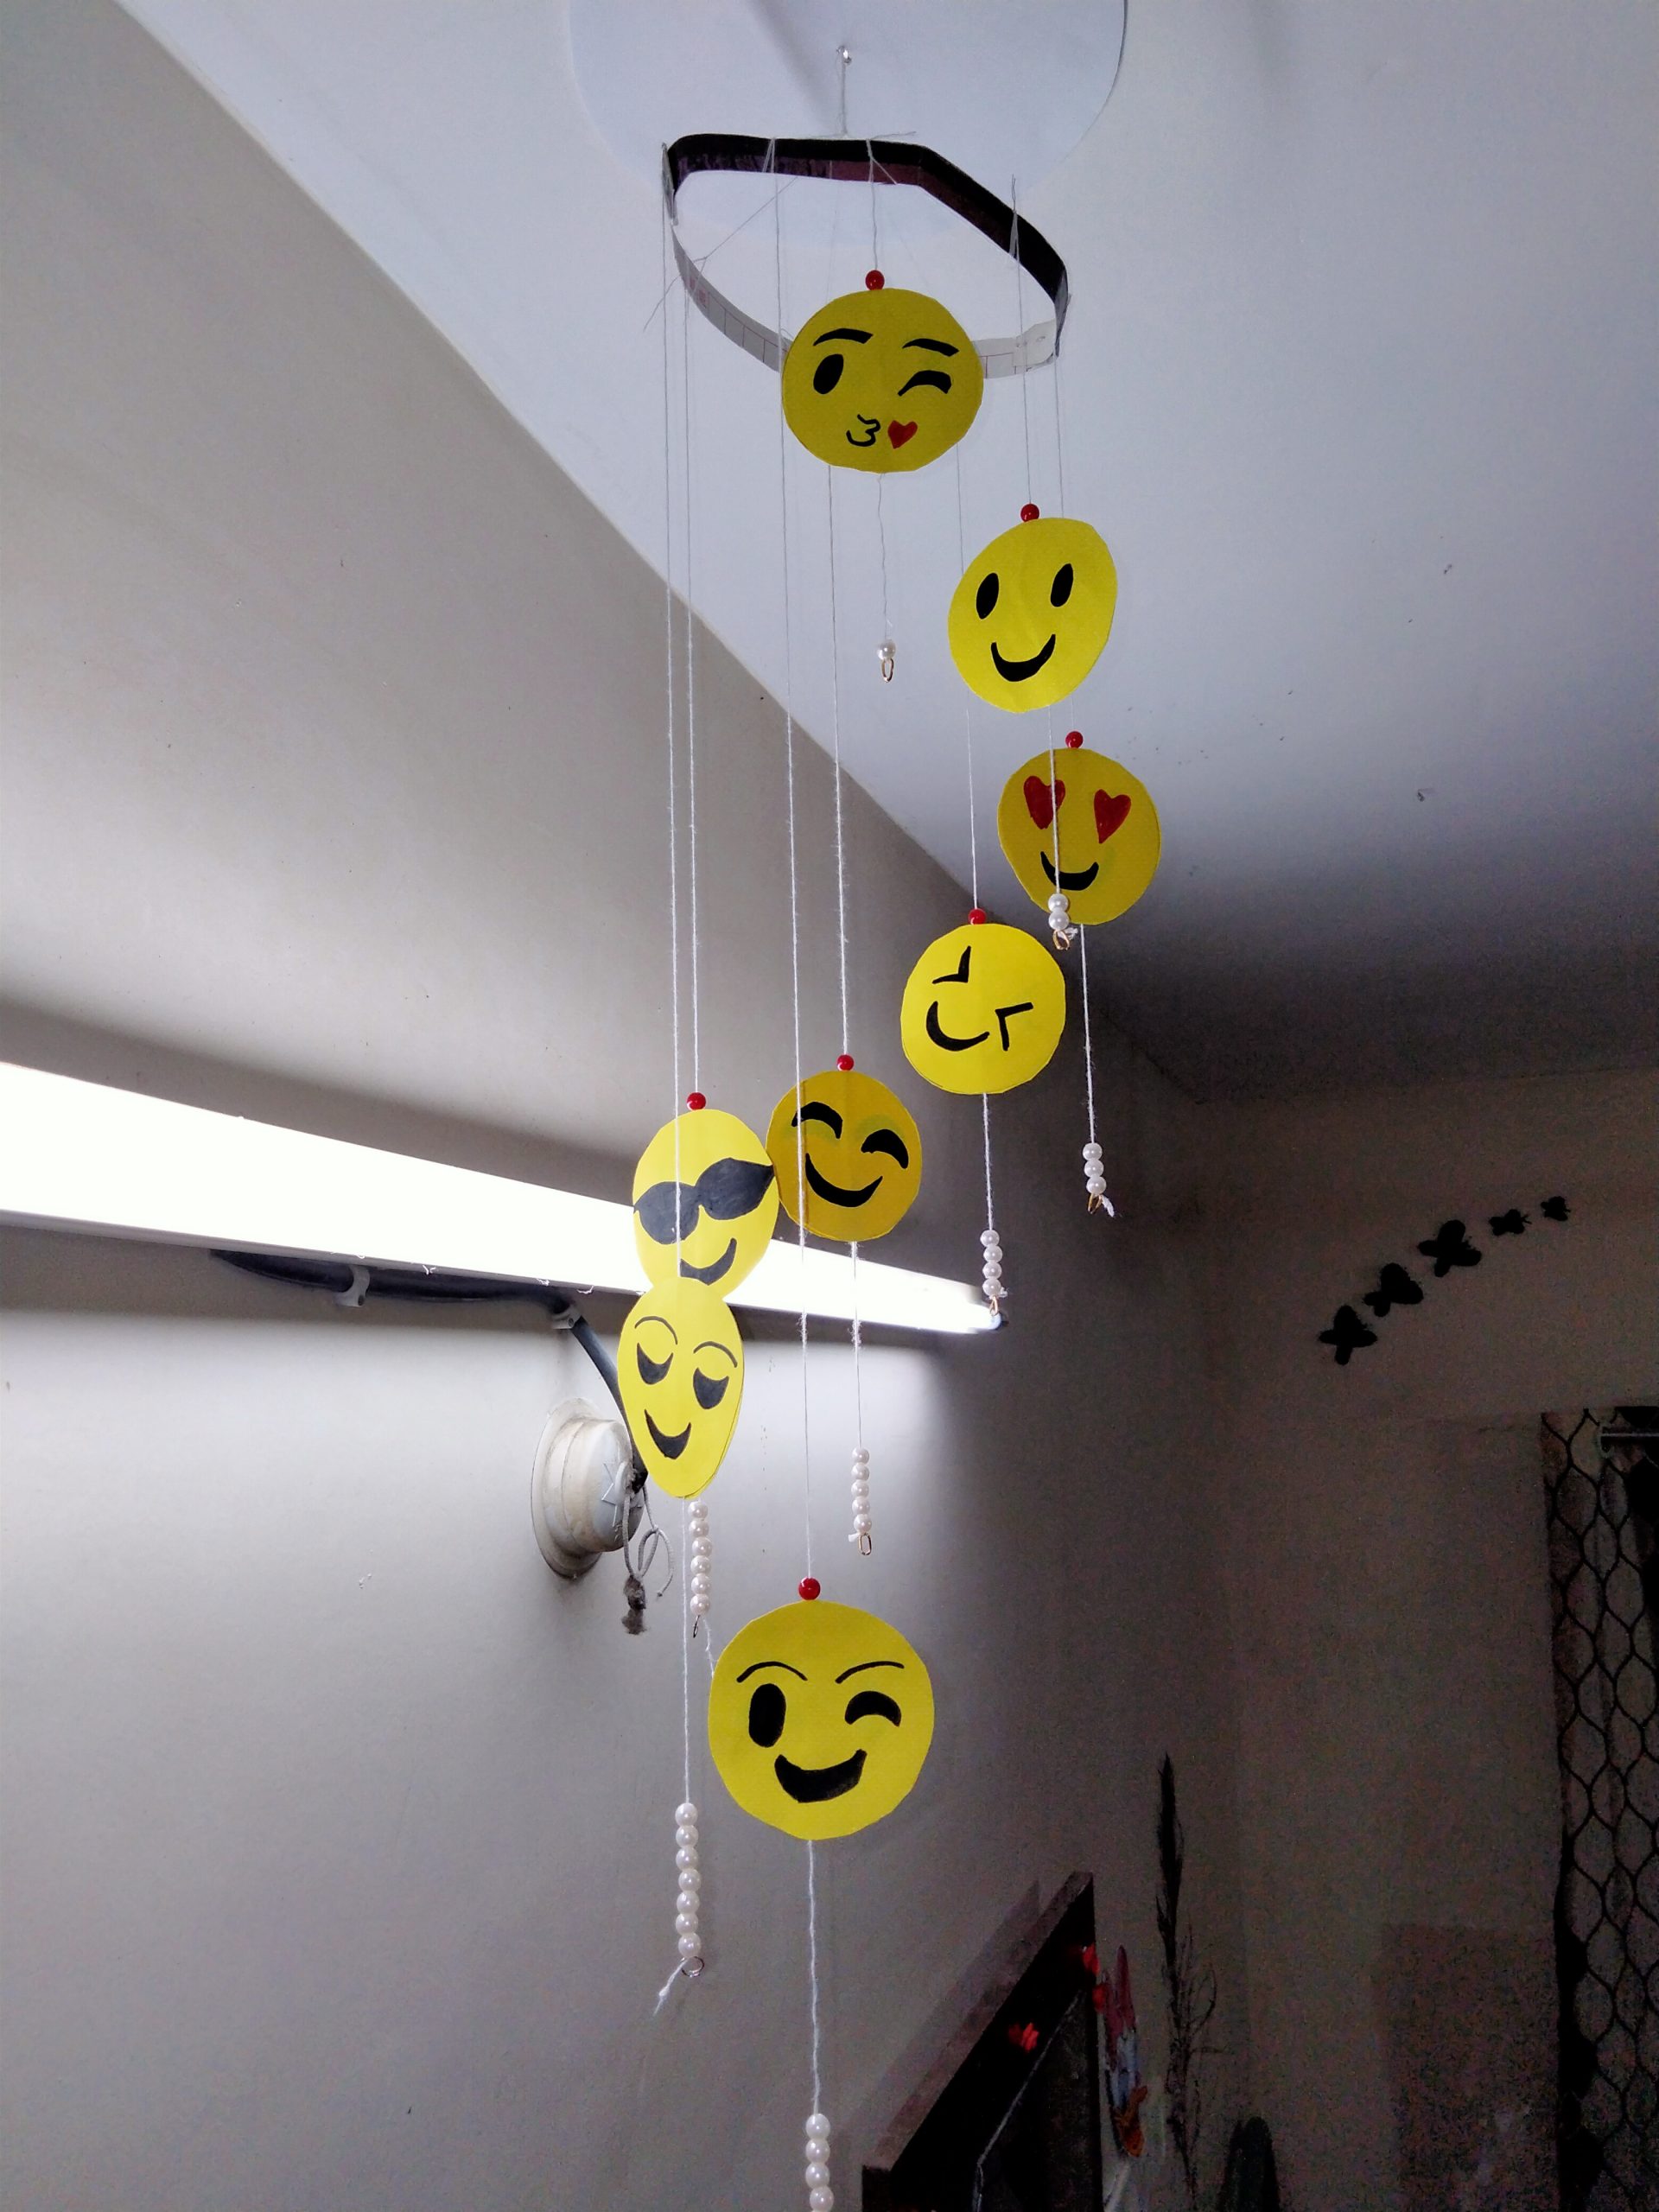 Decorative hanging wind chimes